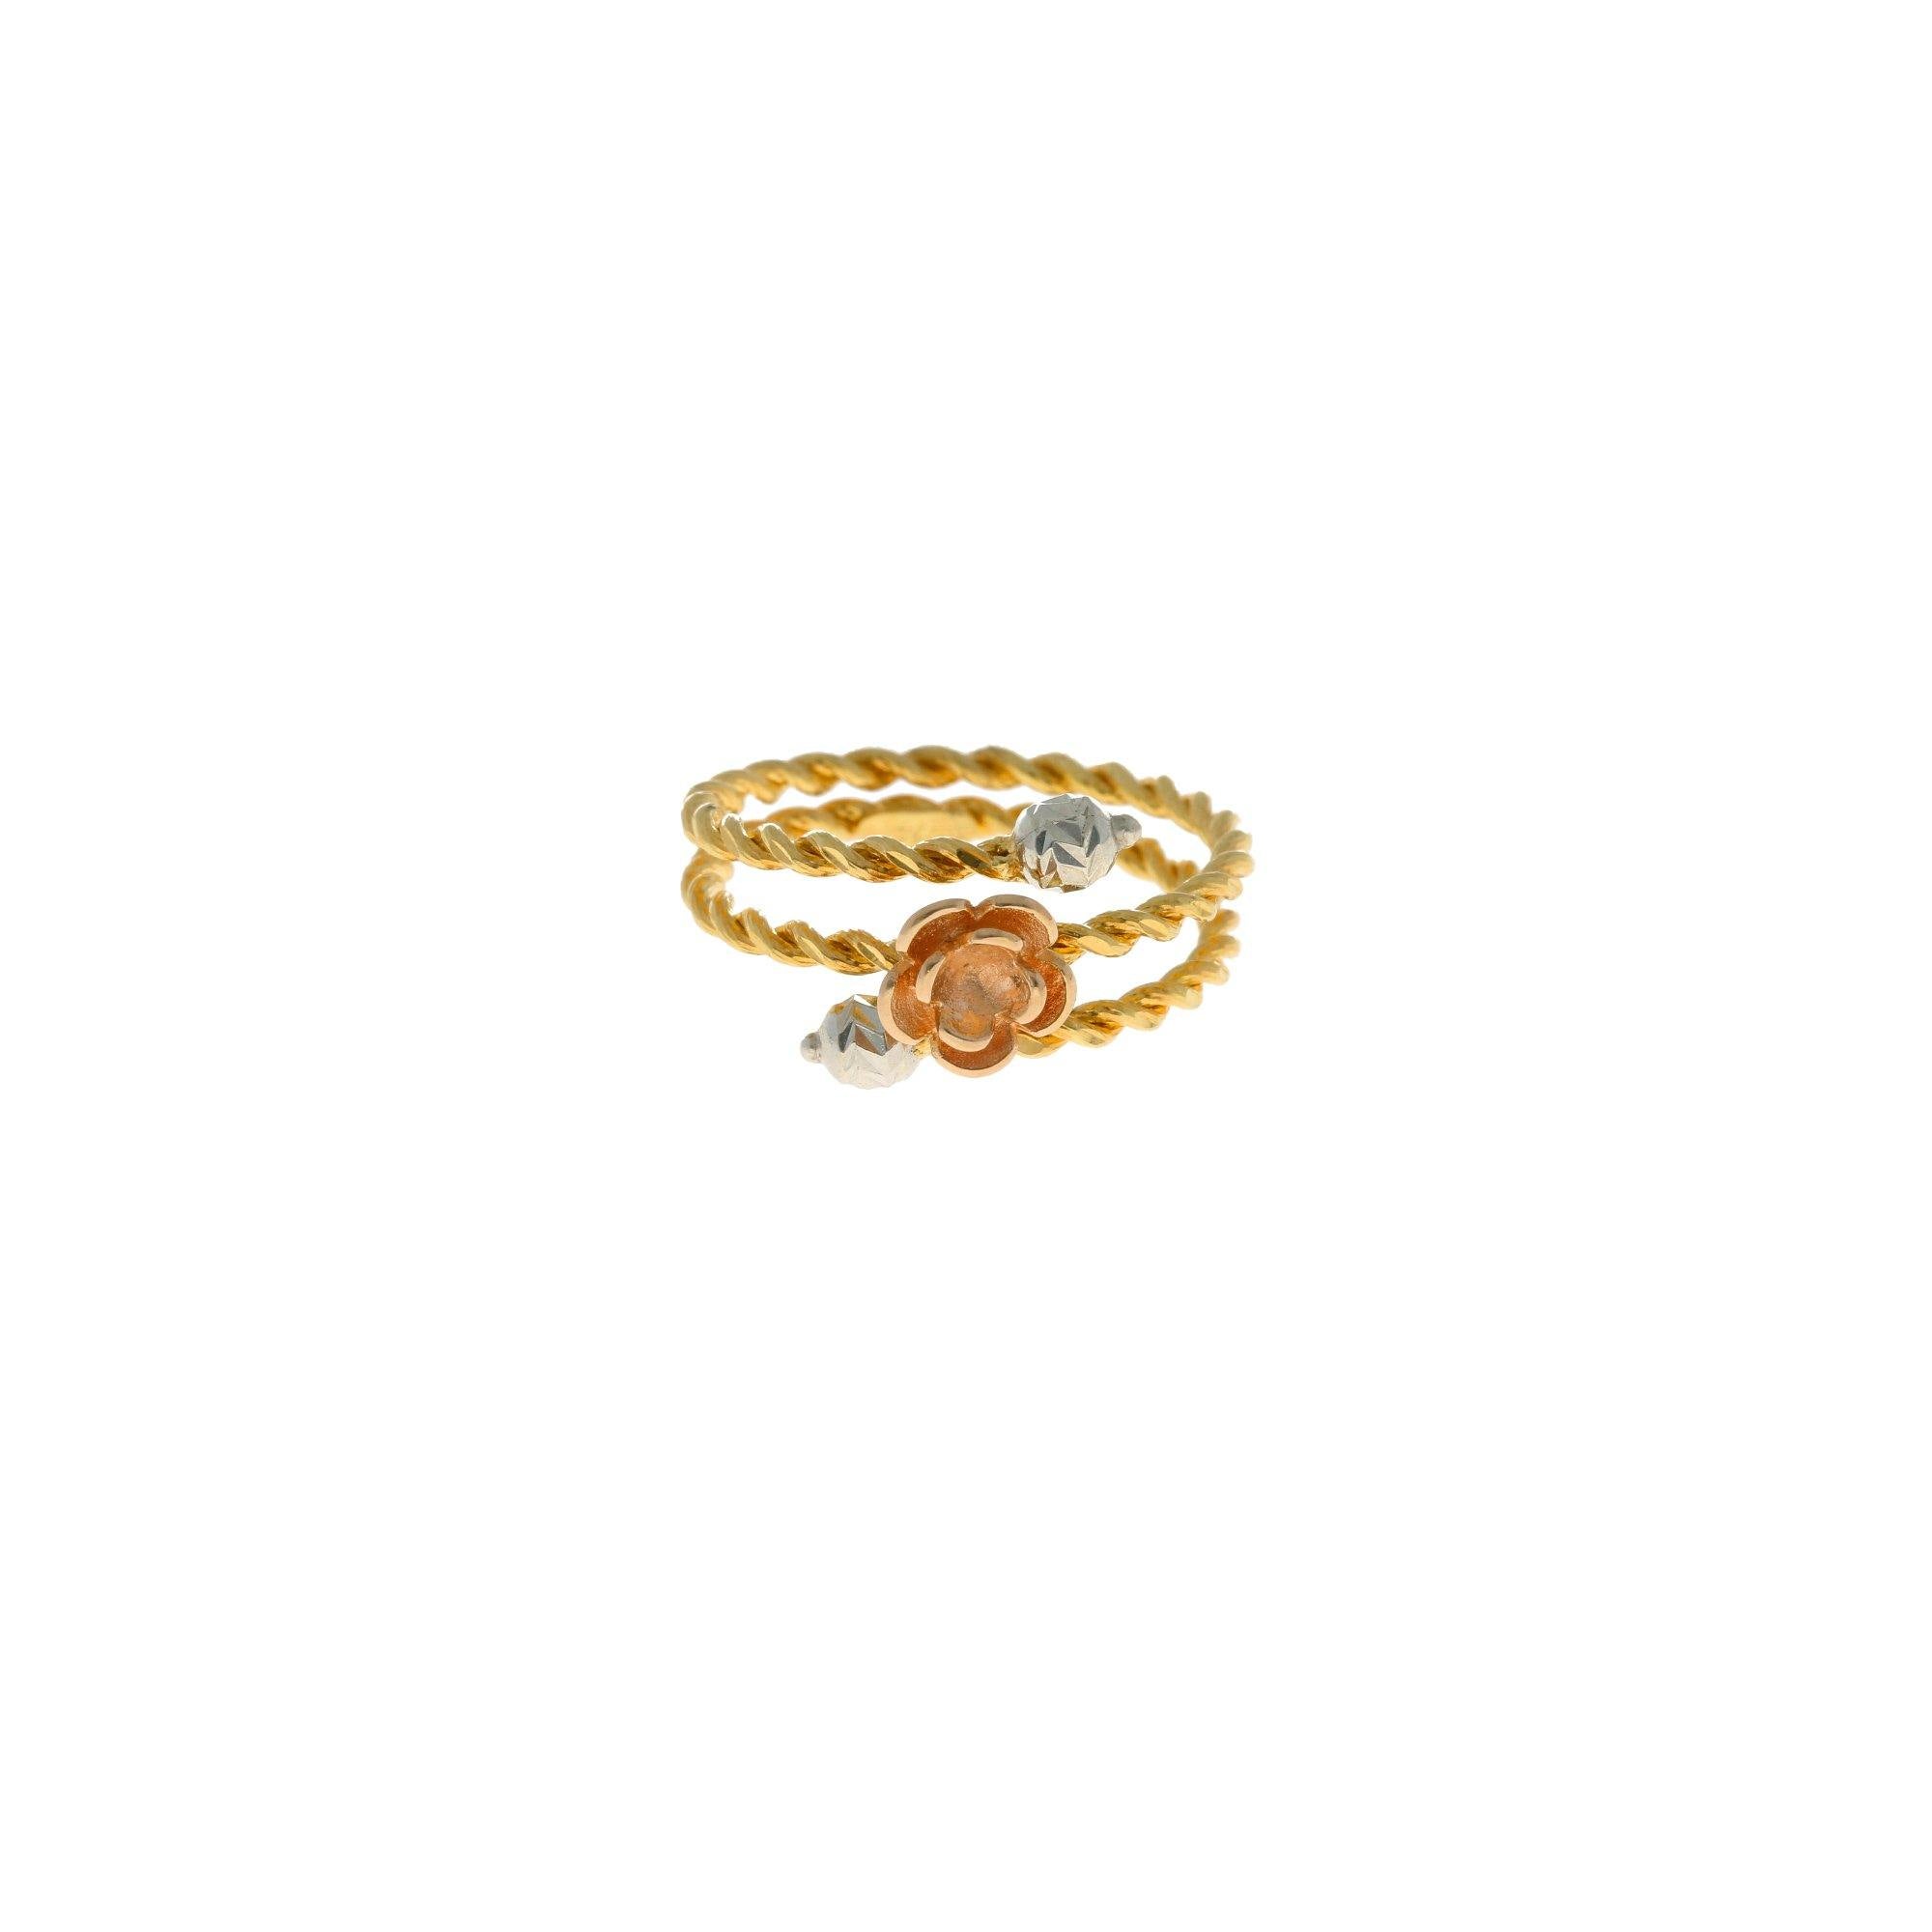 Classic Spiral Ring in Fairmined Gold - Cox & Power Jewellers